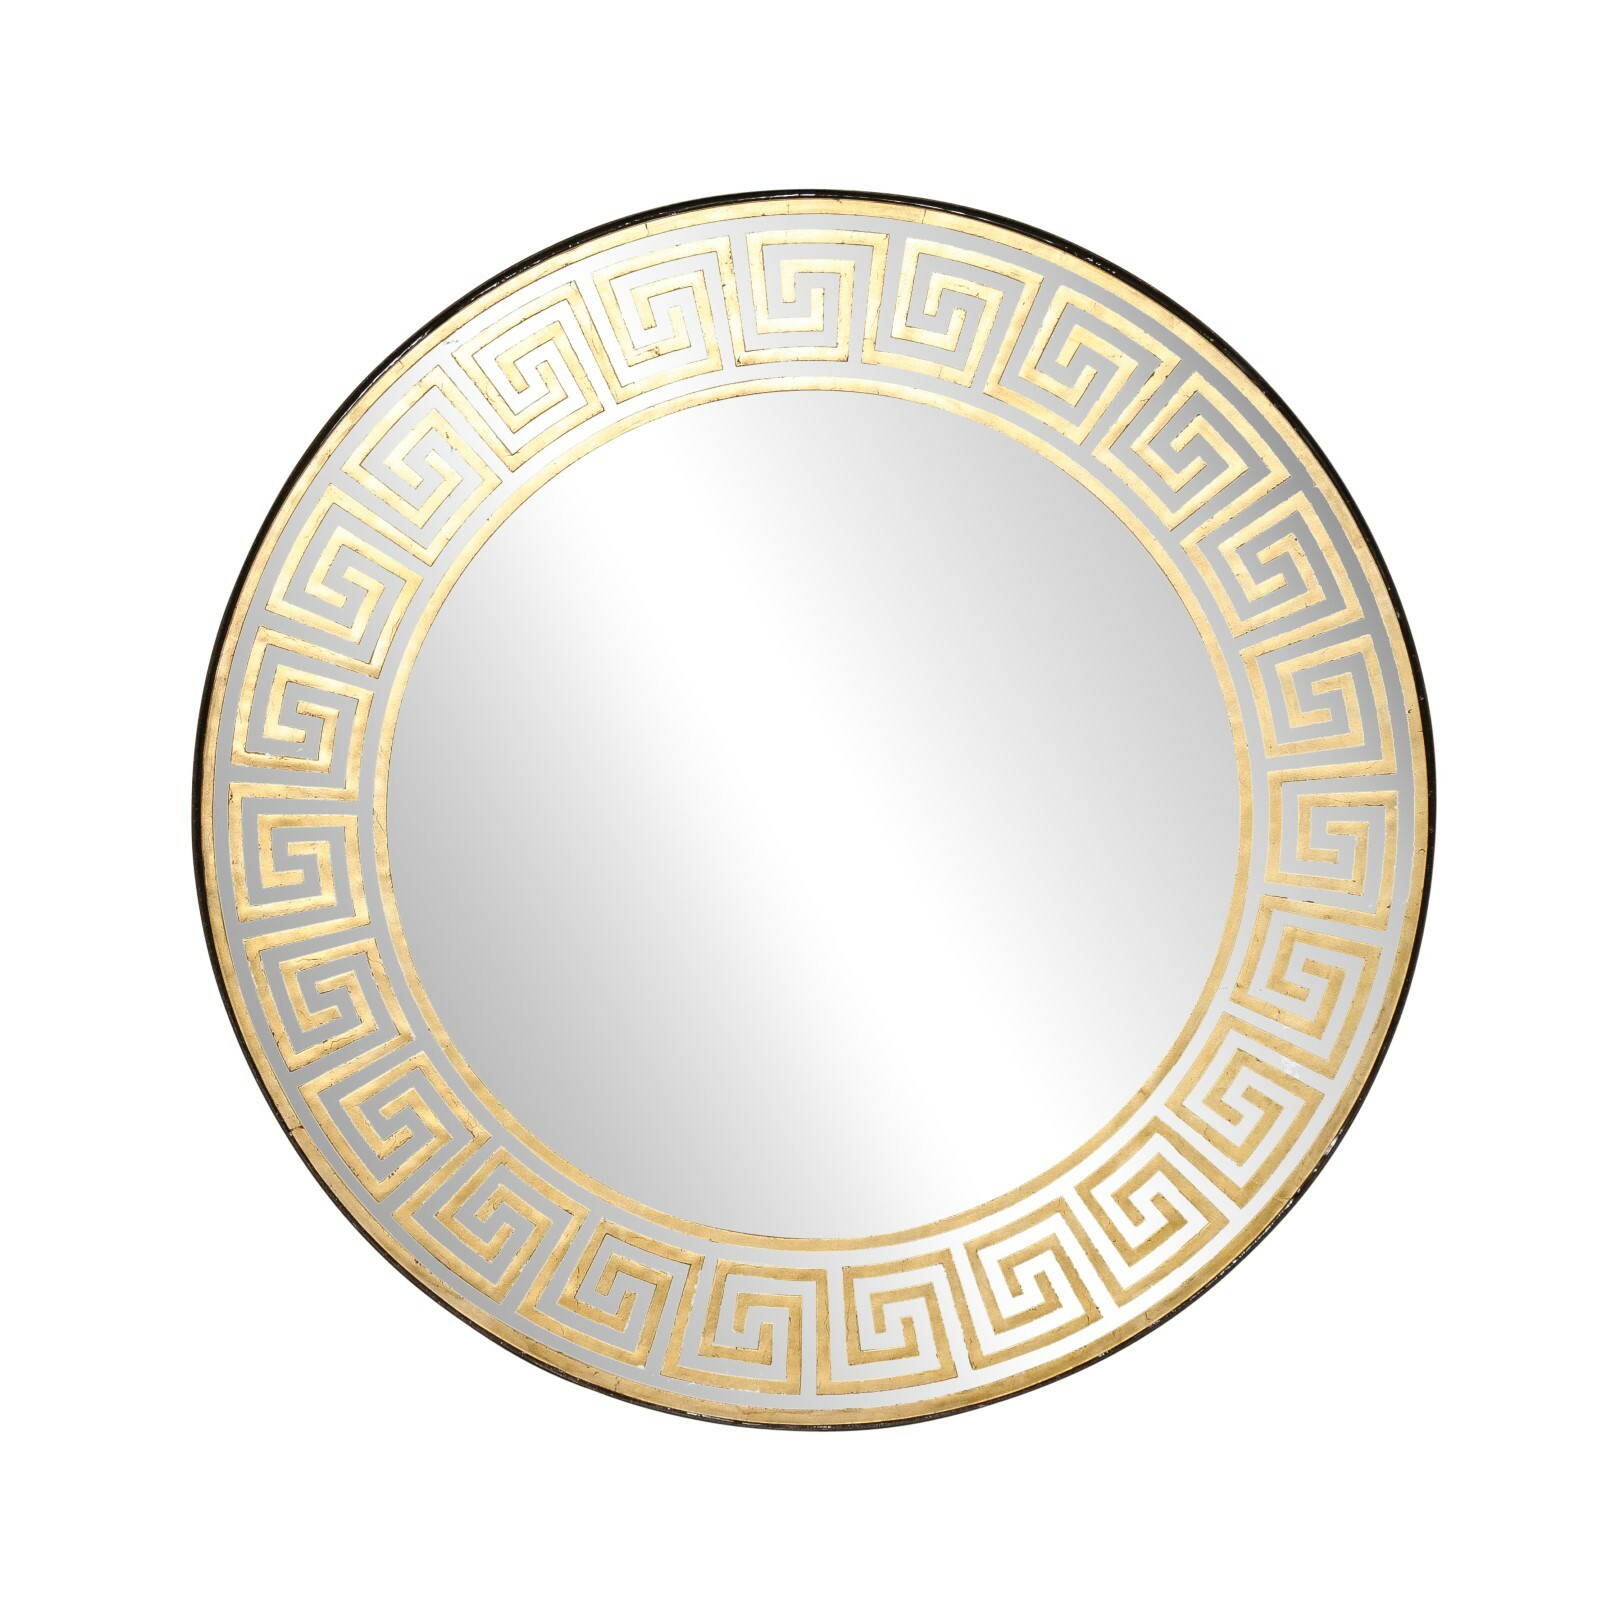 4 Ft. Round Greek Key Mirror, 2 Available